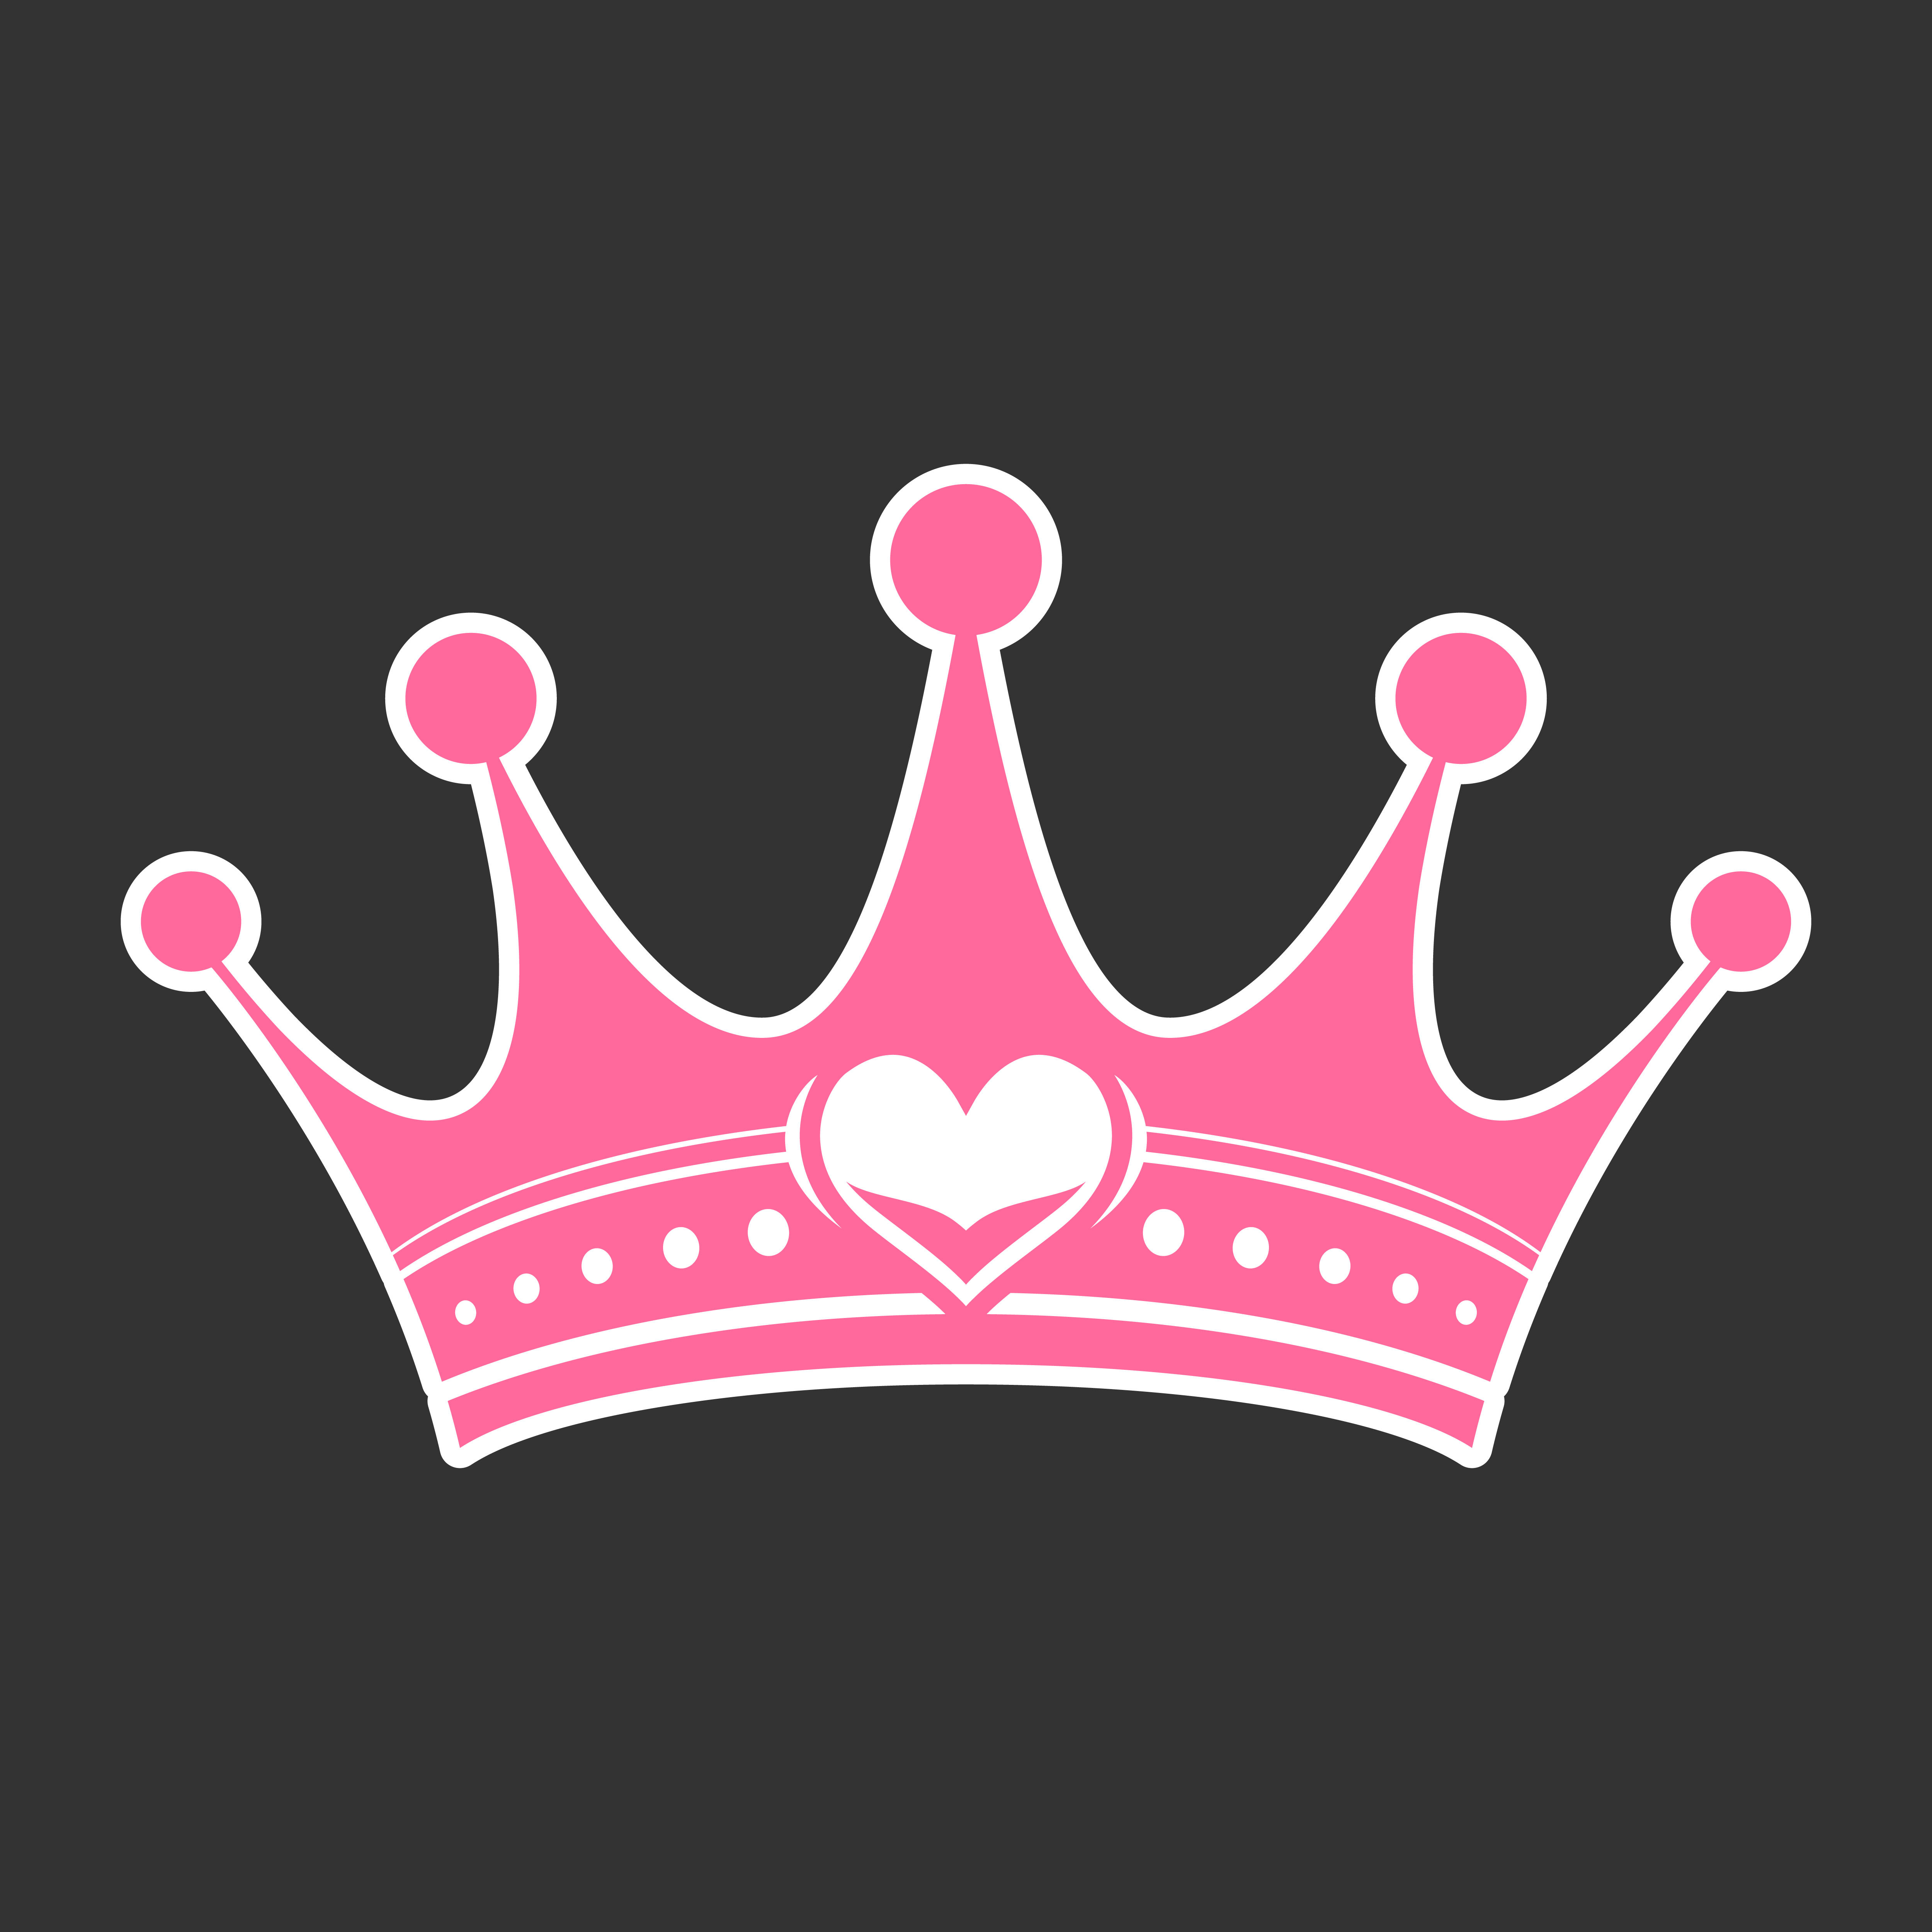 Pink Girly Princess Royalty Crown With Heart Jewels 554648 Vector Art